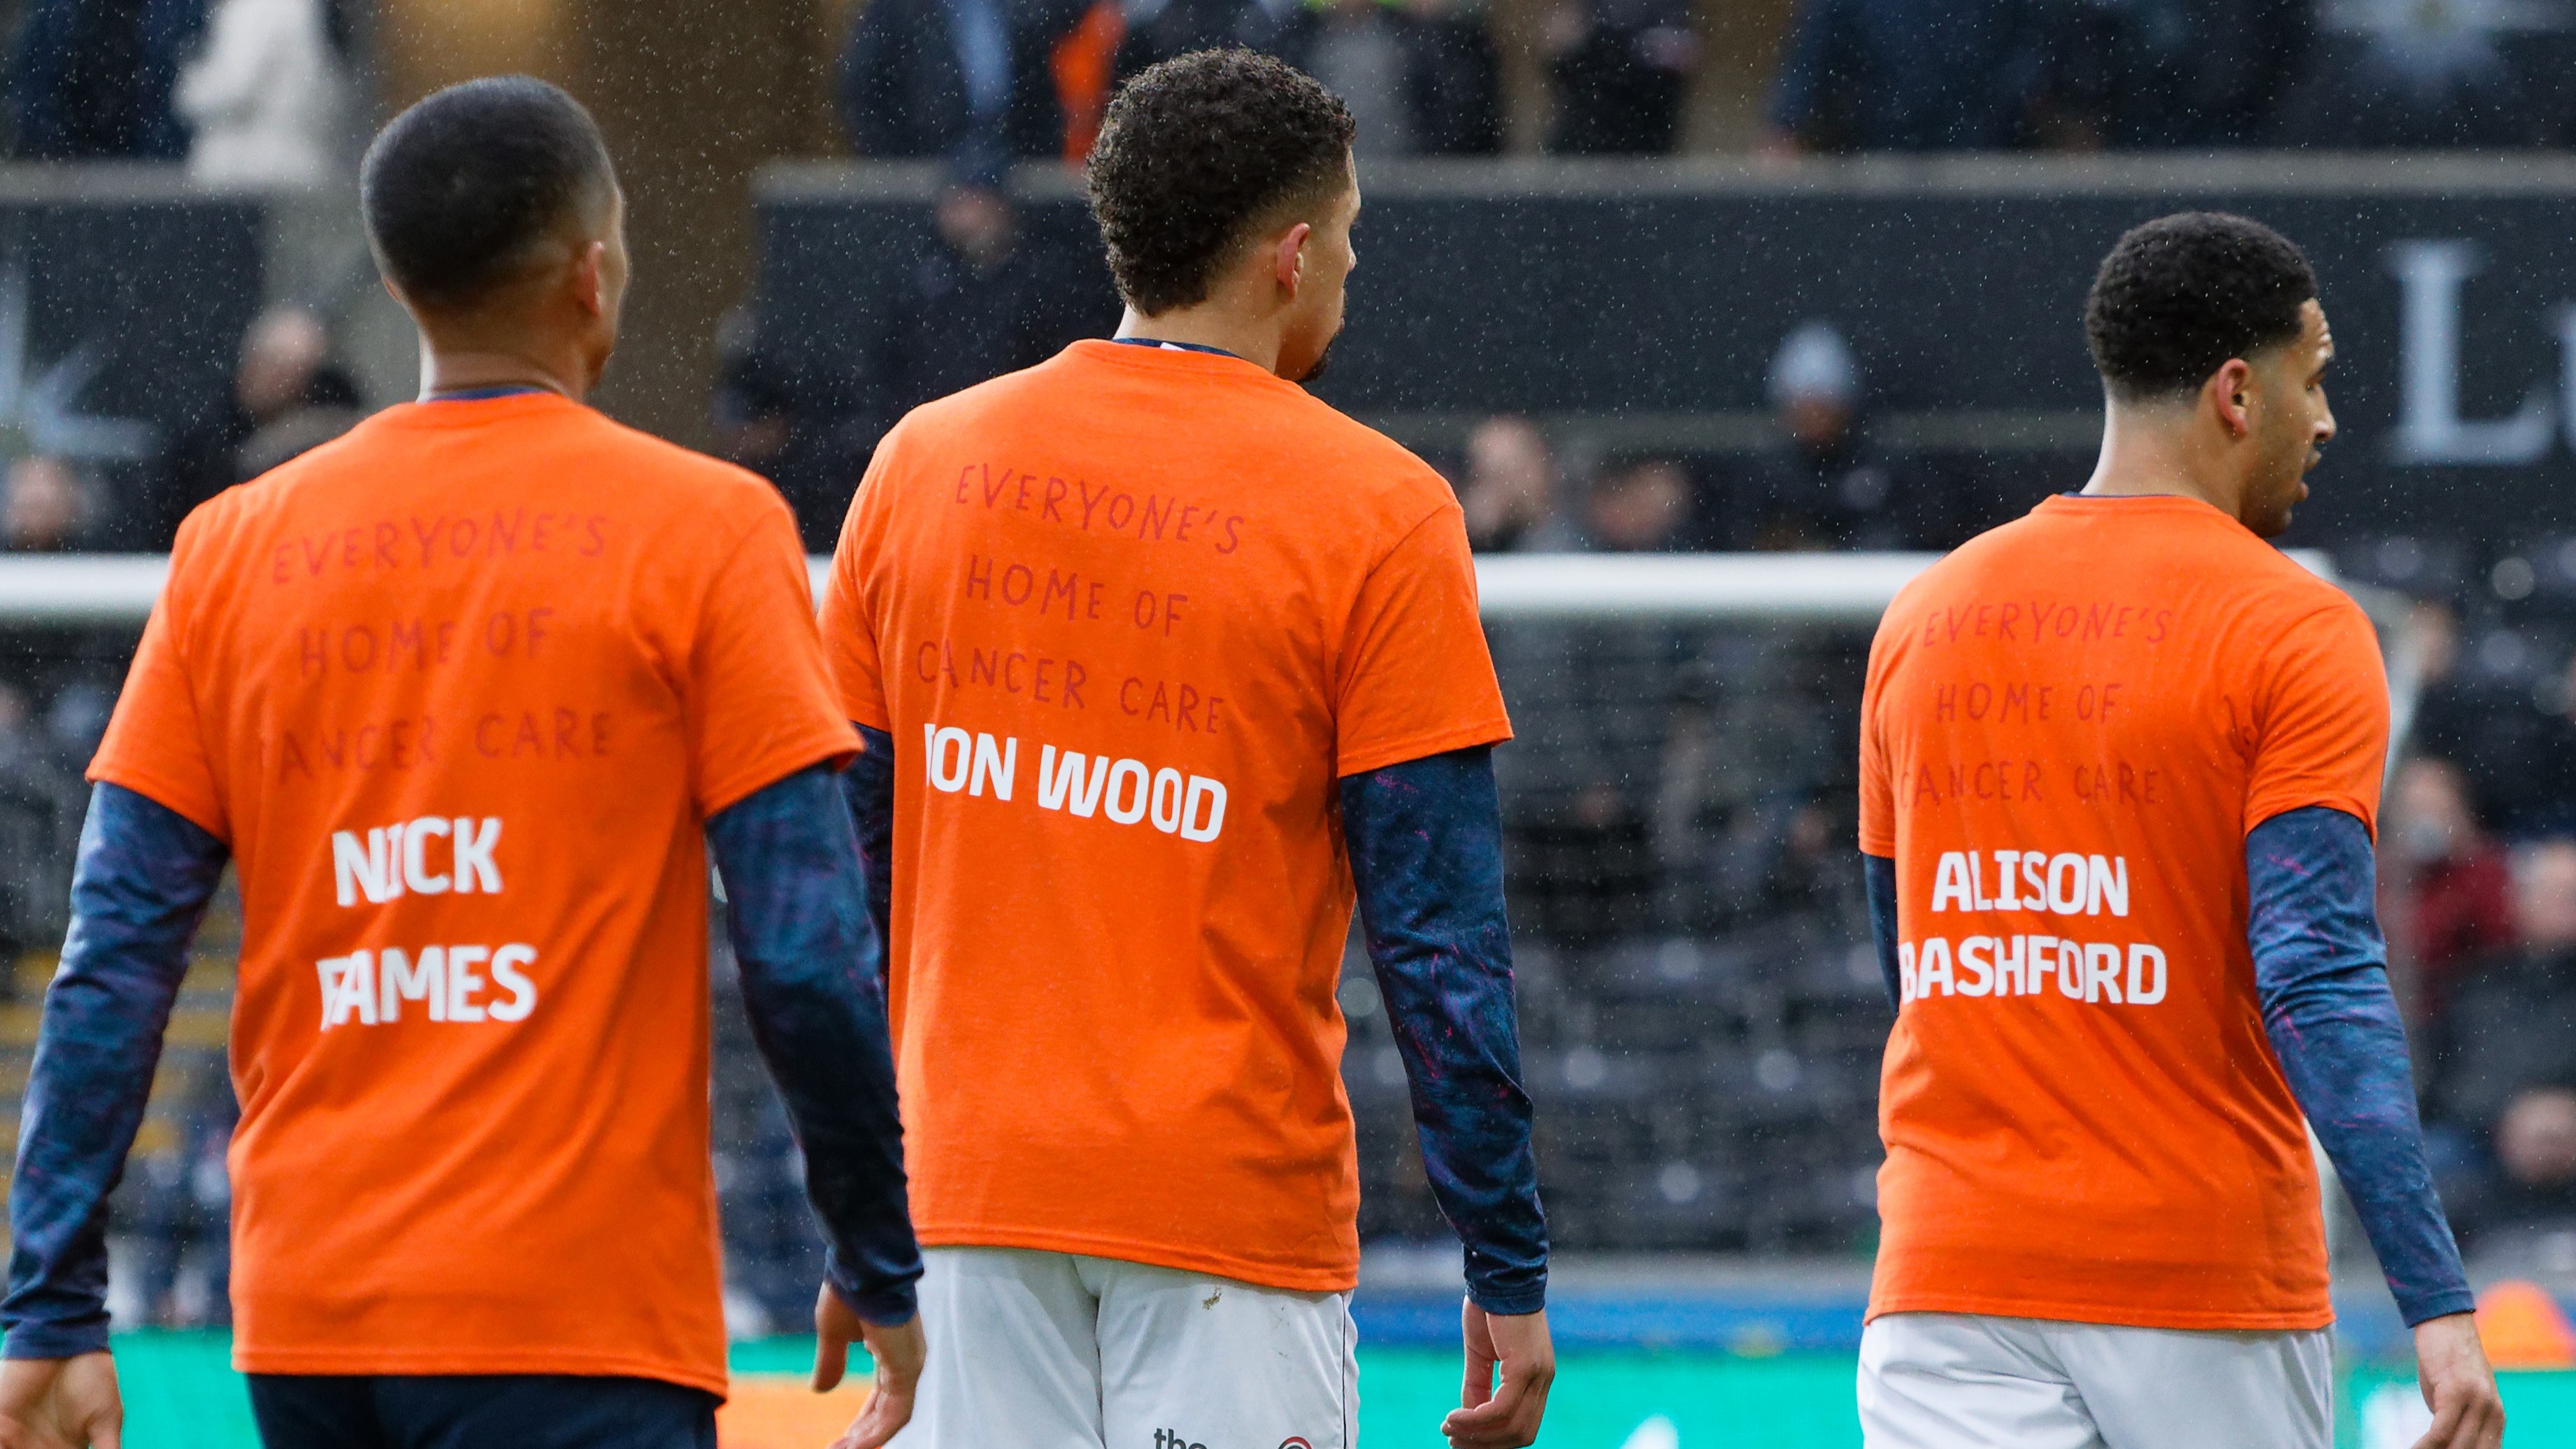 Players warm up in Maggie's Warm up shirts with names of loved ones on the back